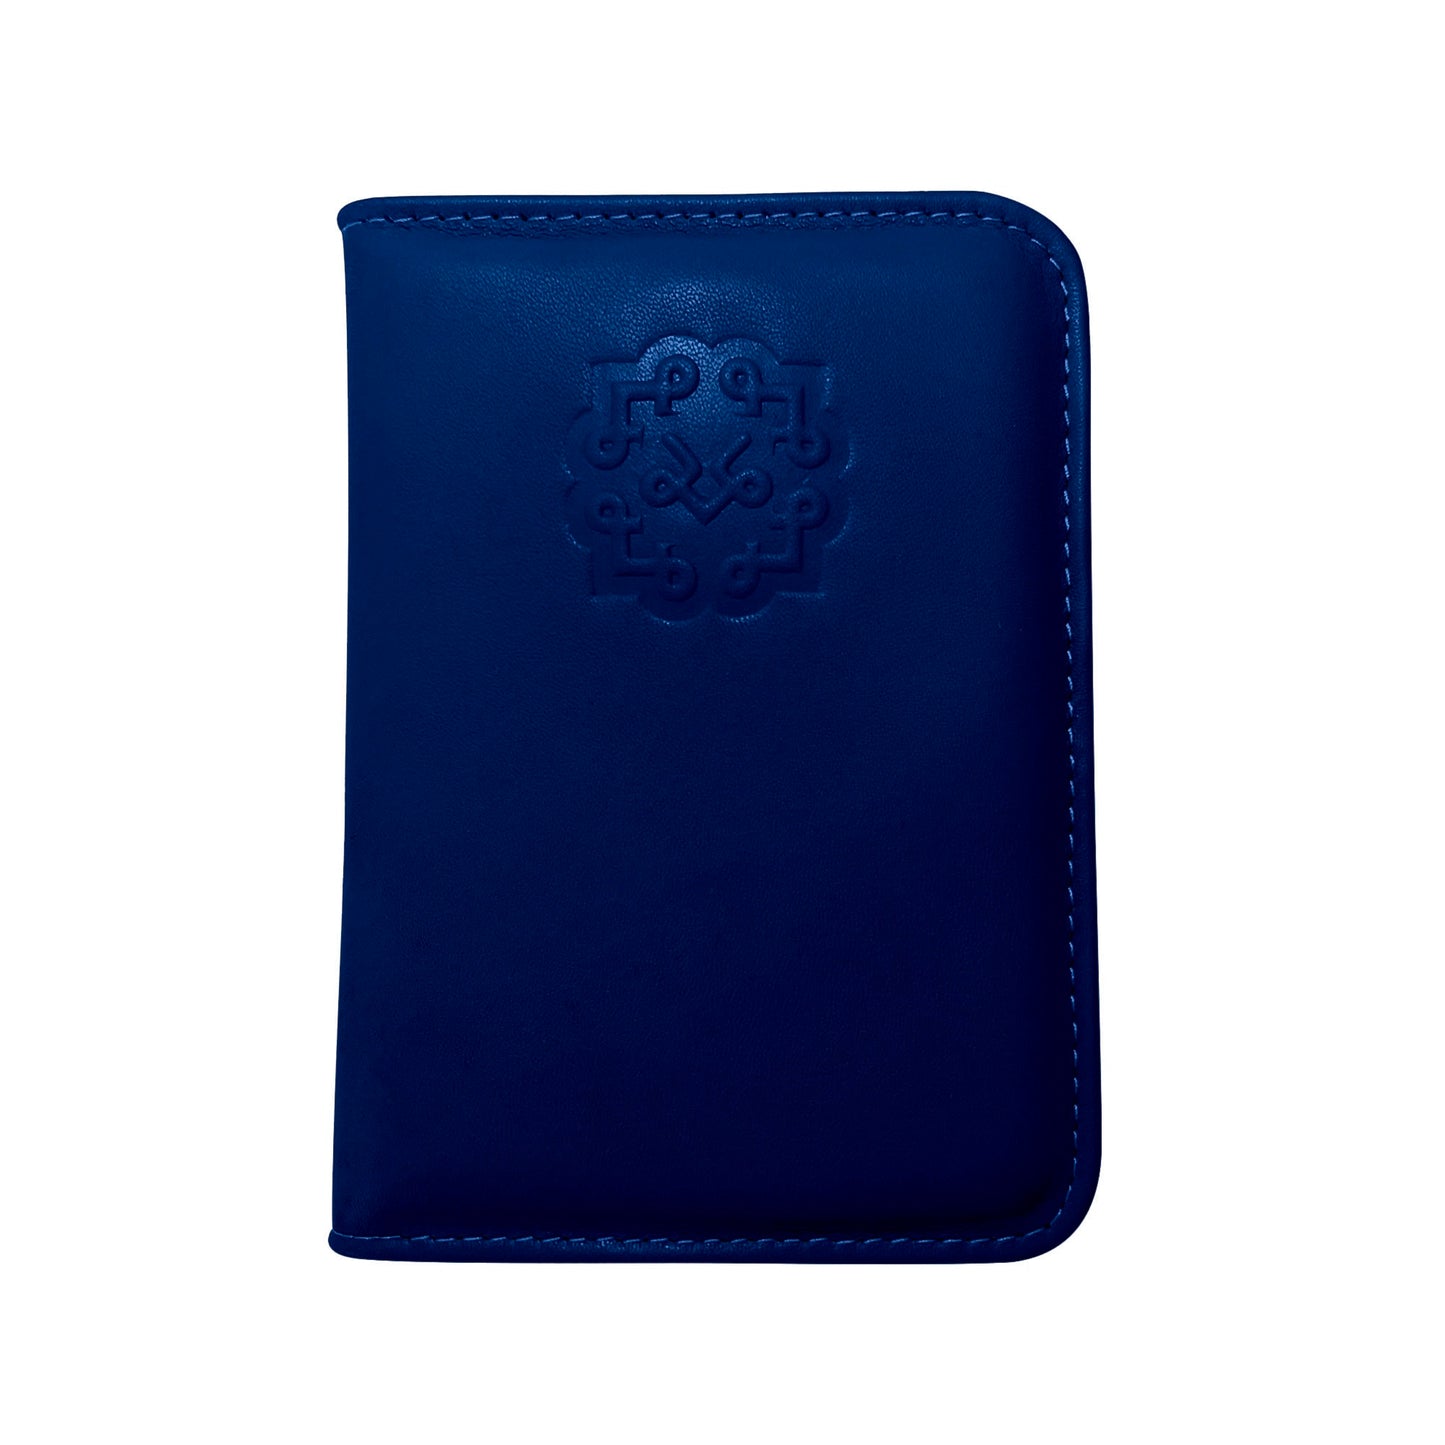 Lotta Pieces | Luxury Leather Passport Holder And Wallet With Gold Metal Logo